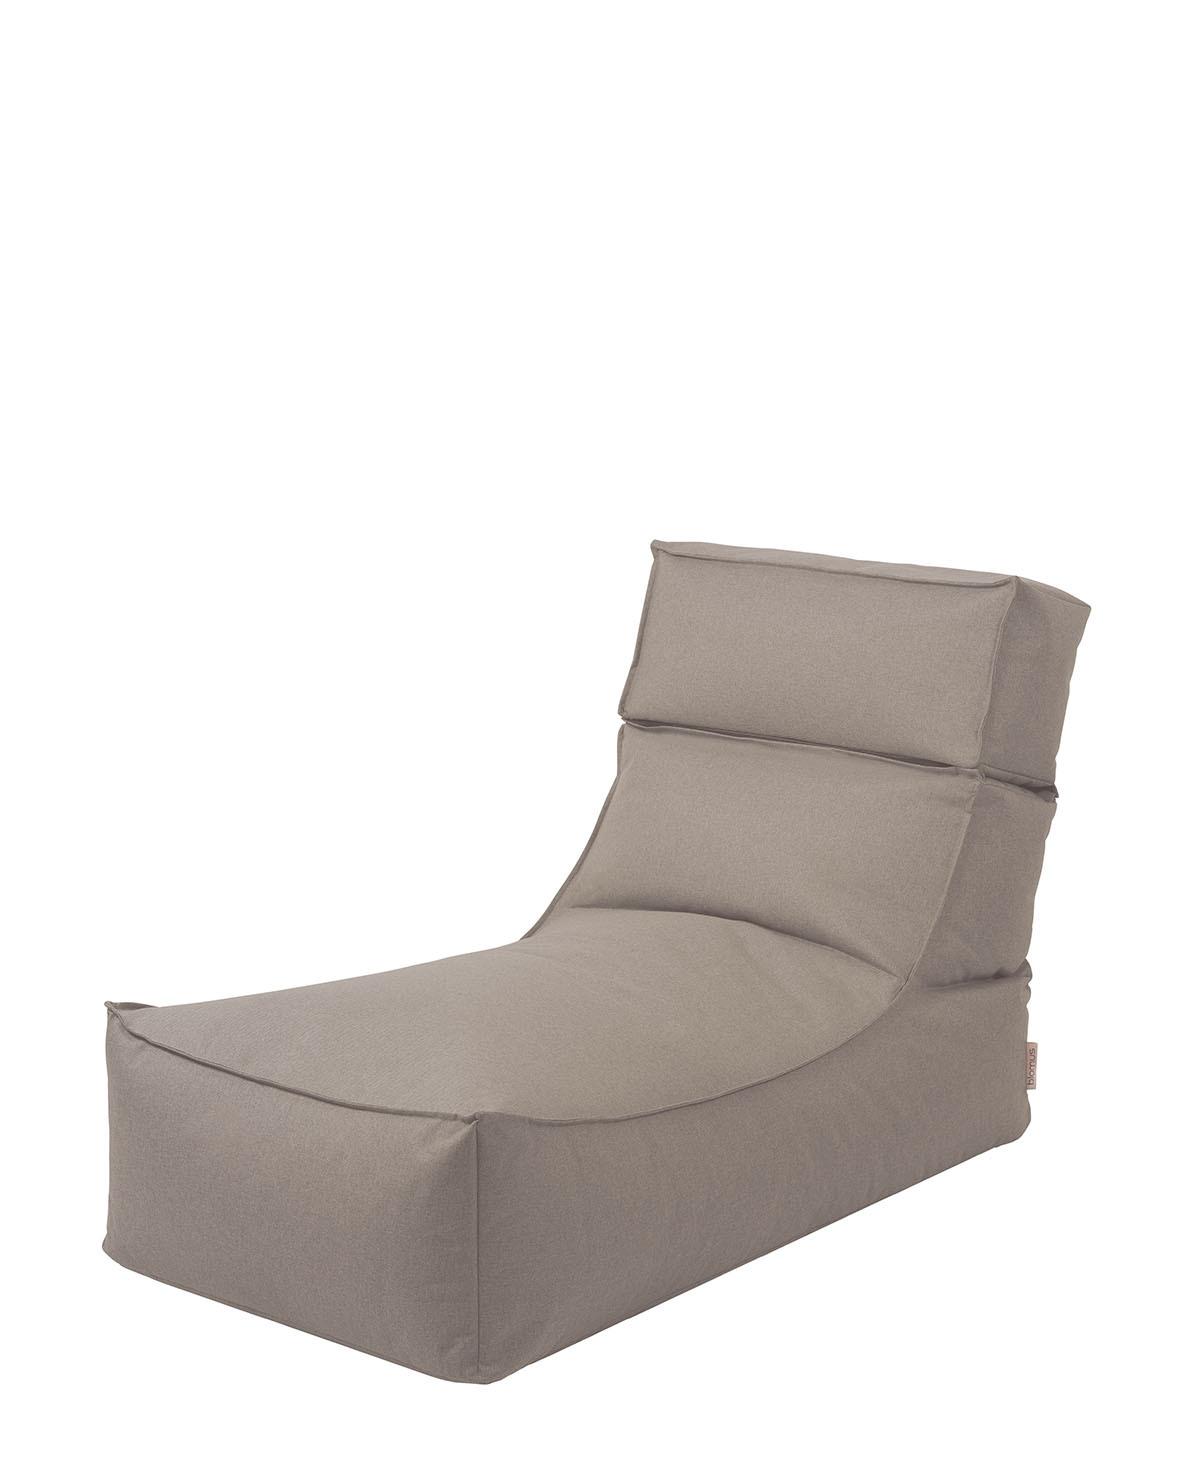 Sonnenliege Lounger Stay Outdoor 120 cm L